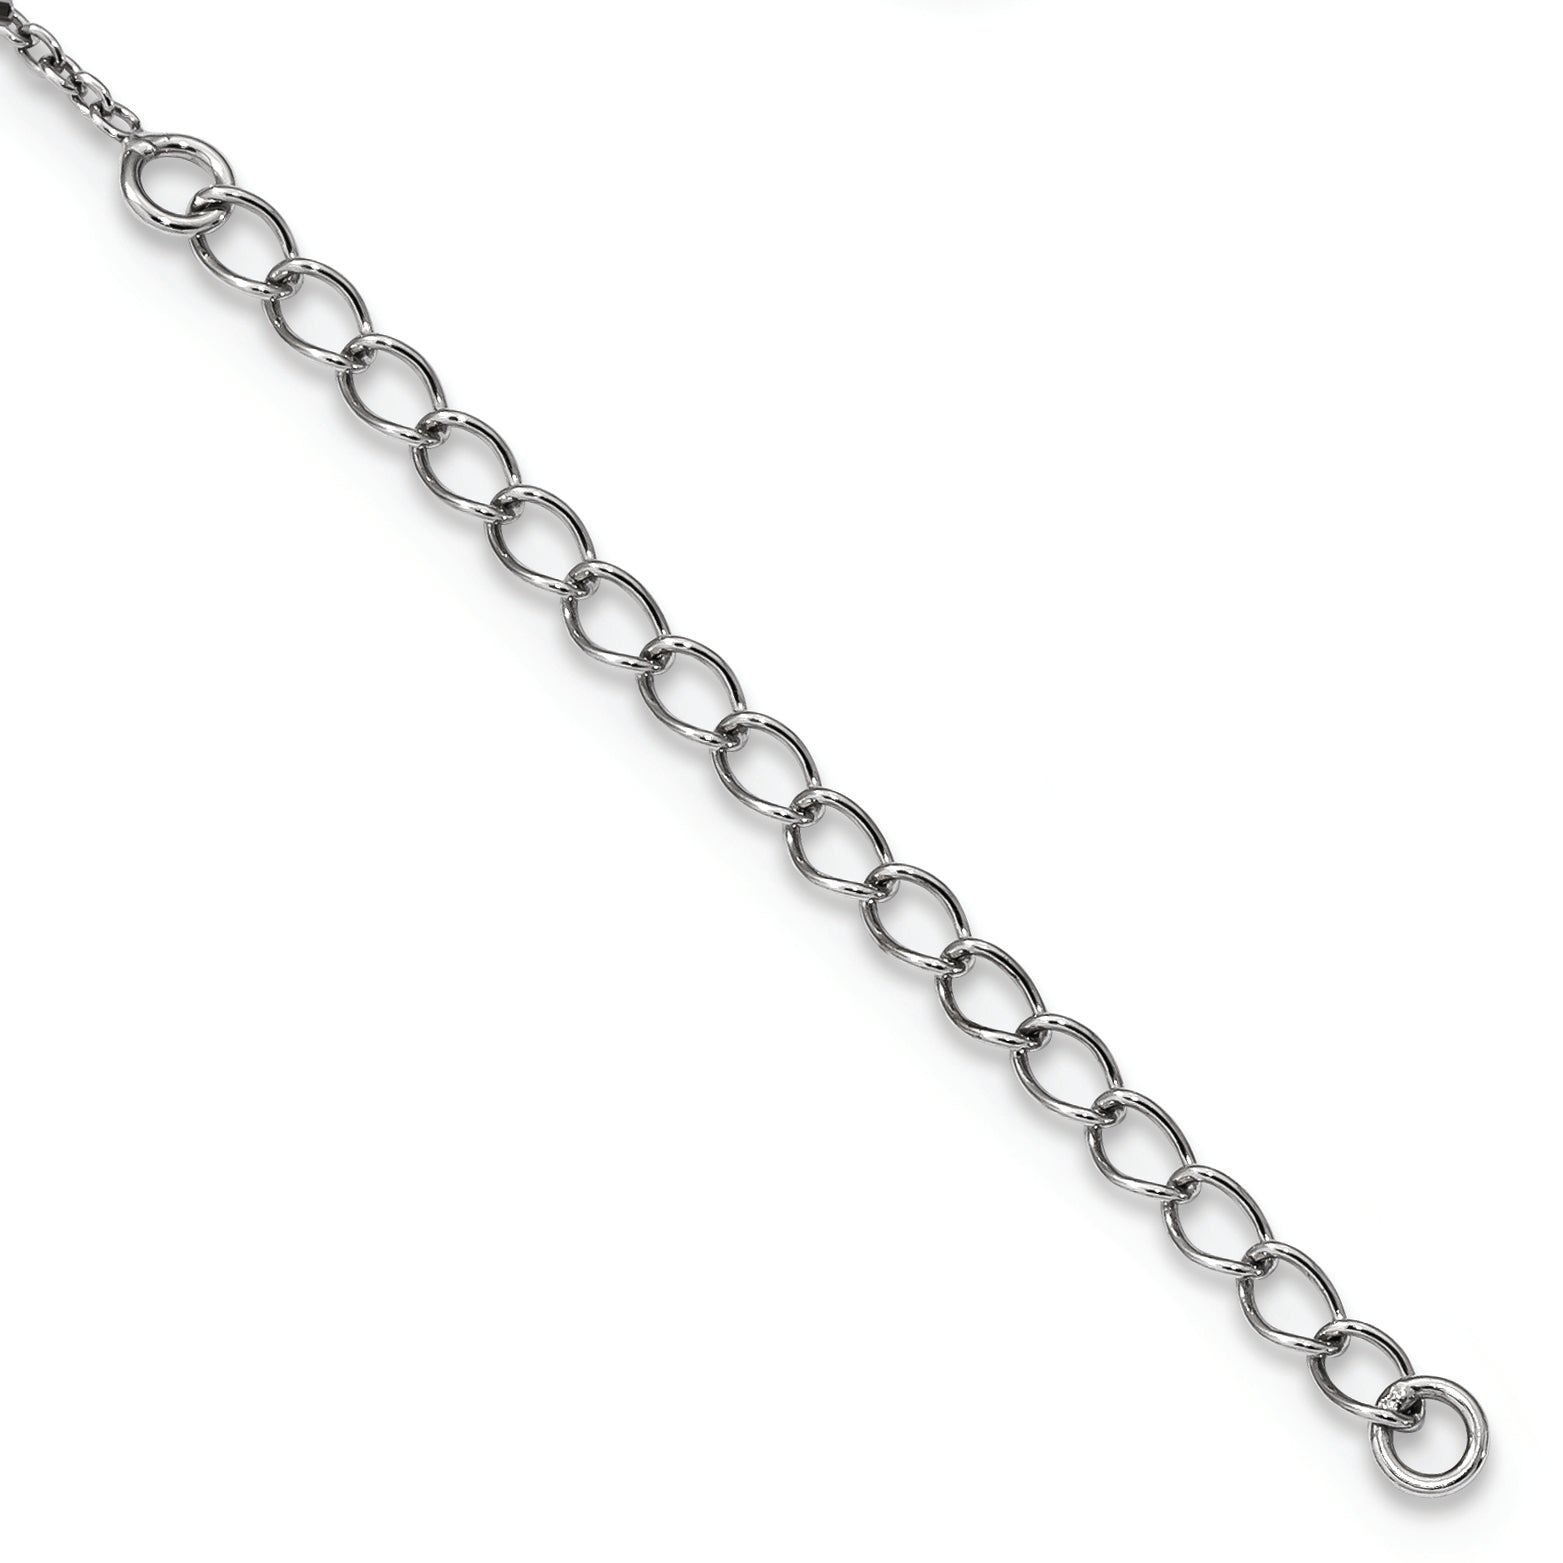 White Night Sterling Silver Rhodium-plated Swirl White and Blue Diamond 18 inch Necklace with 2 Inch Extender